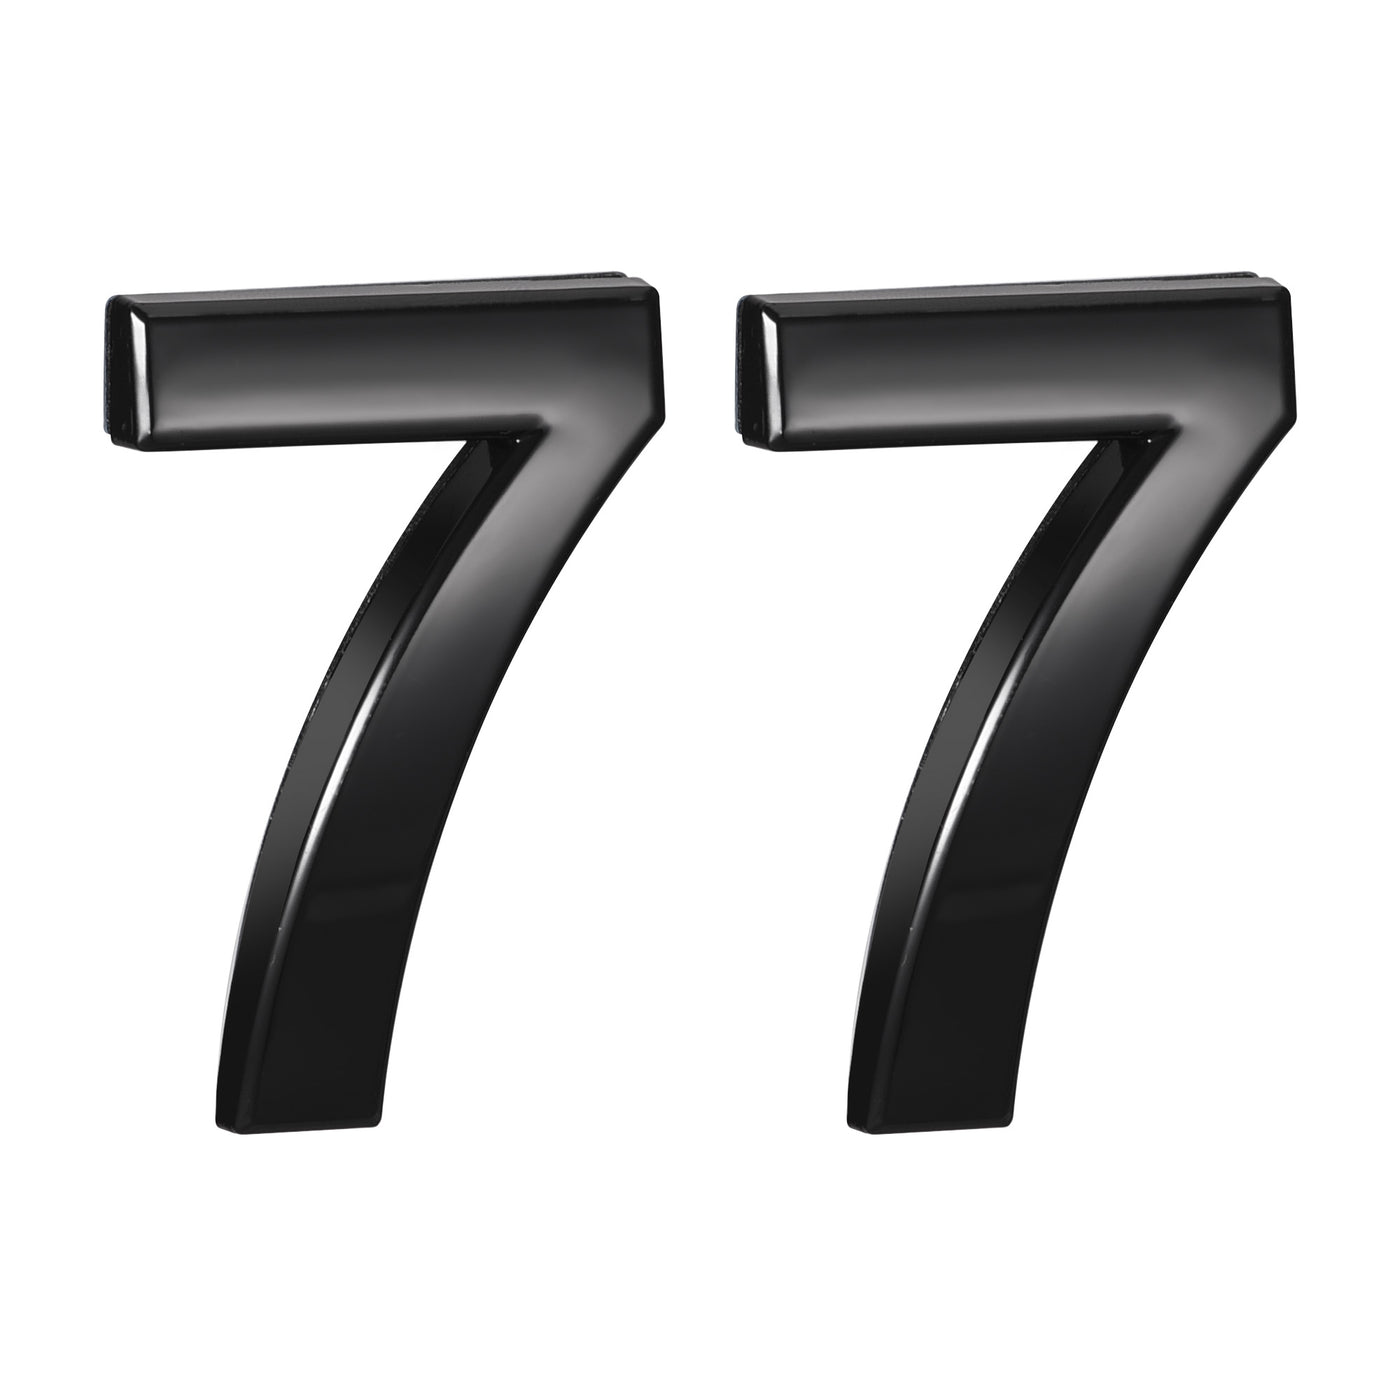 Uxcell Uxcell Self Adhesive House Number, 1.97 Inch ABS Plastic Number 3 for House Hotel Mailbox Address Sign Black 2 Pcs